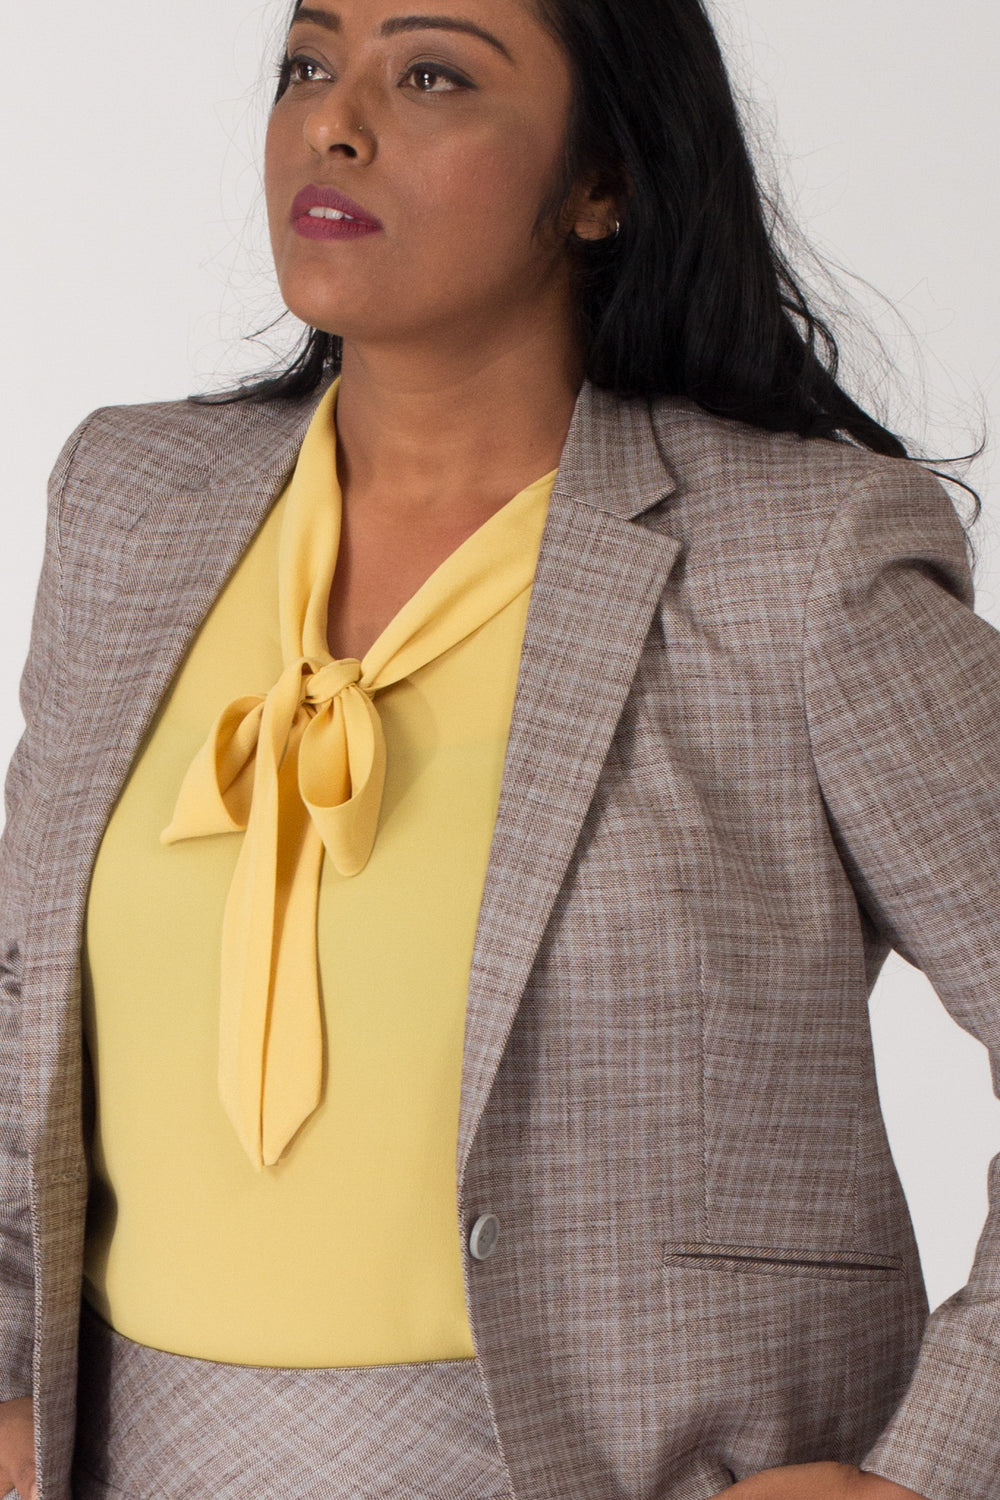 Cotton Formal Blazer for Working Women. Shop for formal business suits and formal trousers, dresses online at www.intermod.in